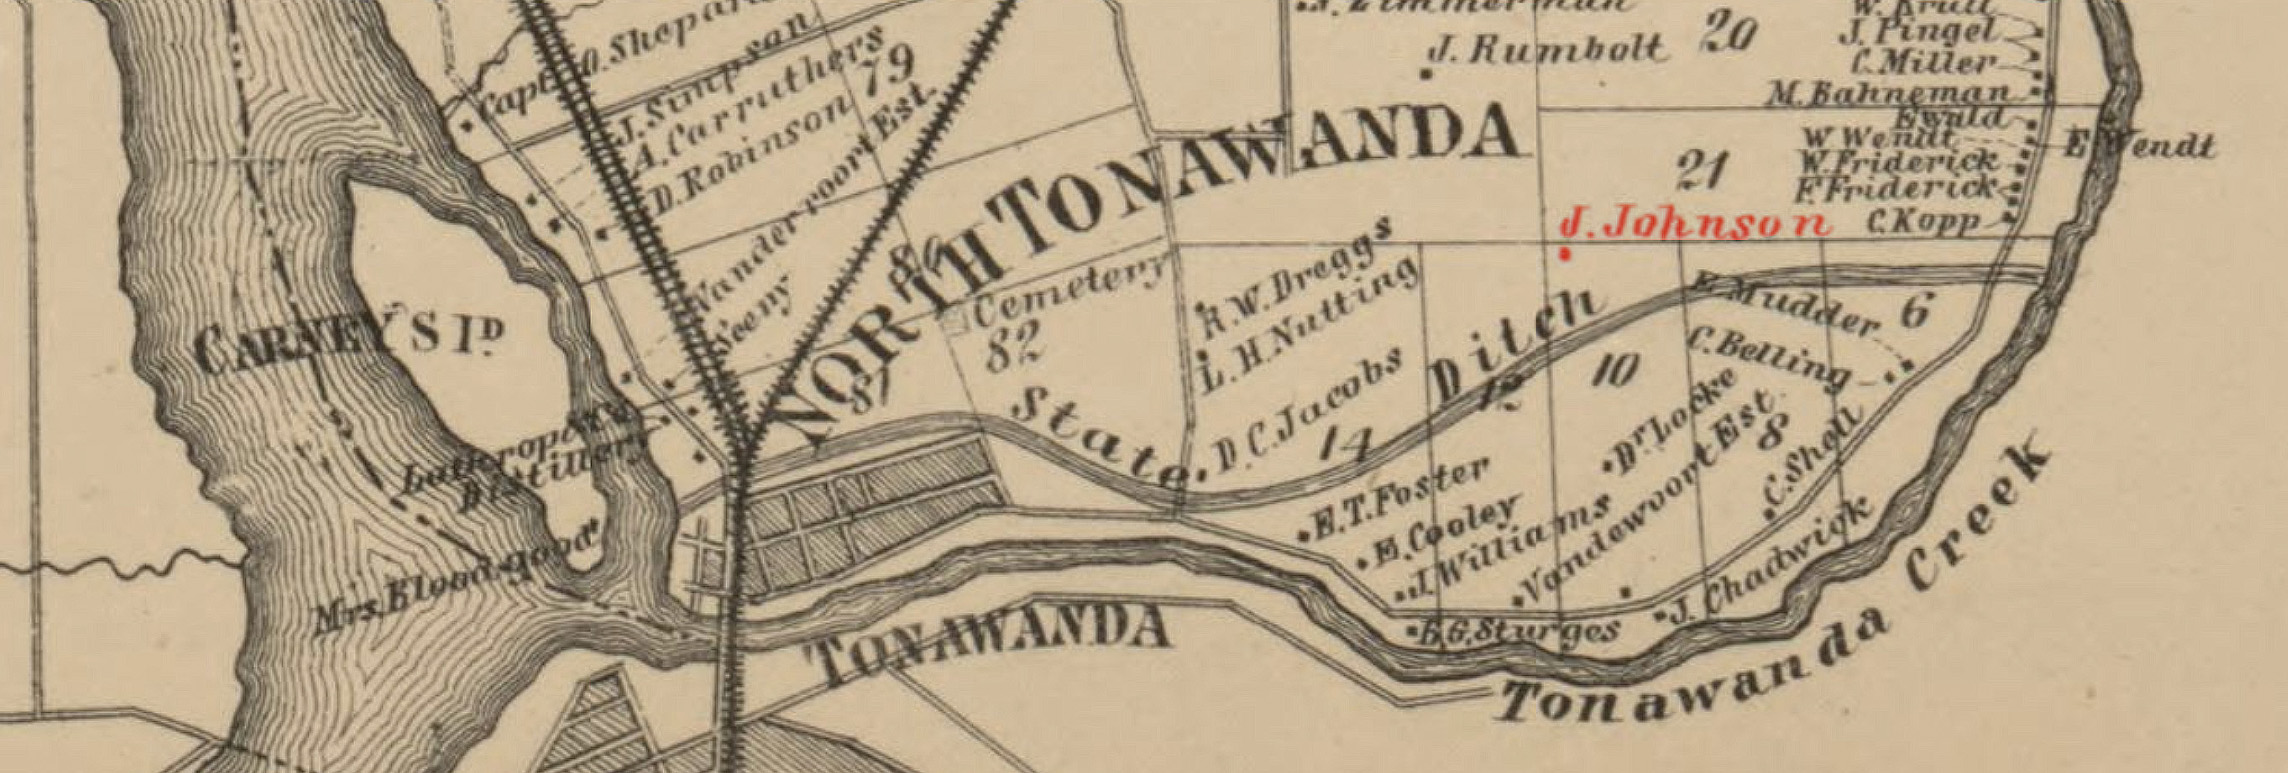 The John Johnson frame dwelling, denoted on an 1860 map